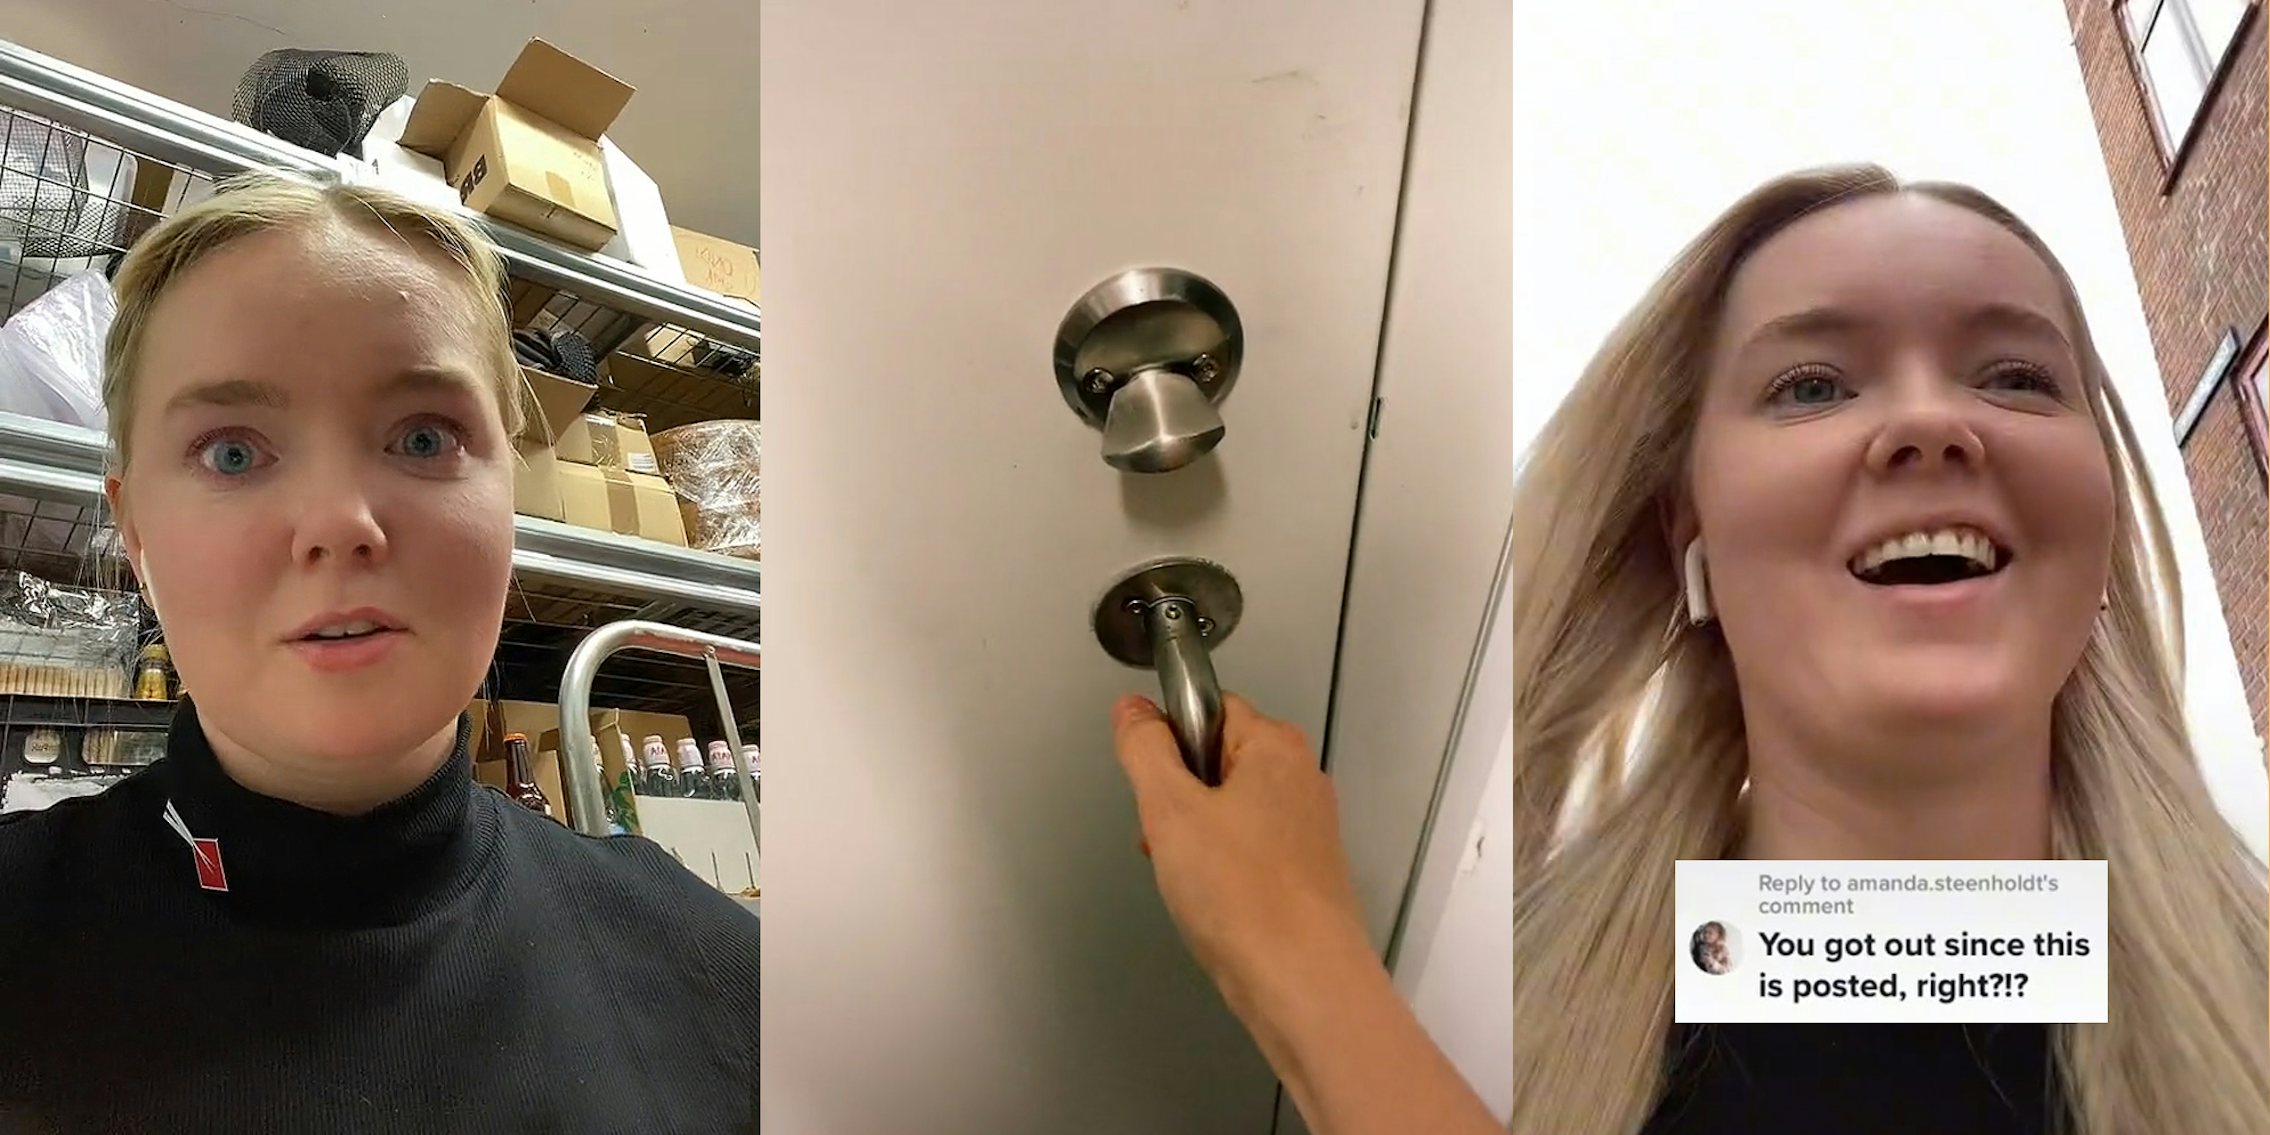 worker speaking while locked in back room (l) worker hand on door handle (c) worker outside of work caption 'You got out since this is posted, right?!?' (r)